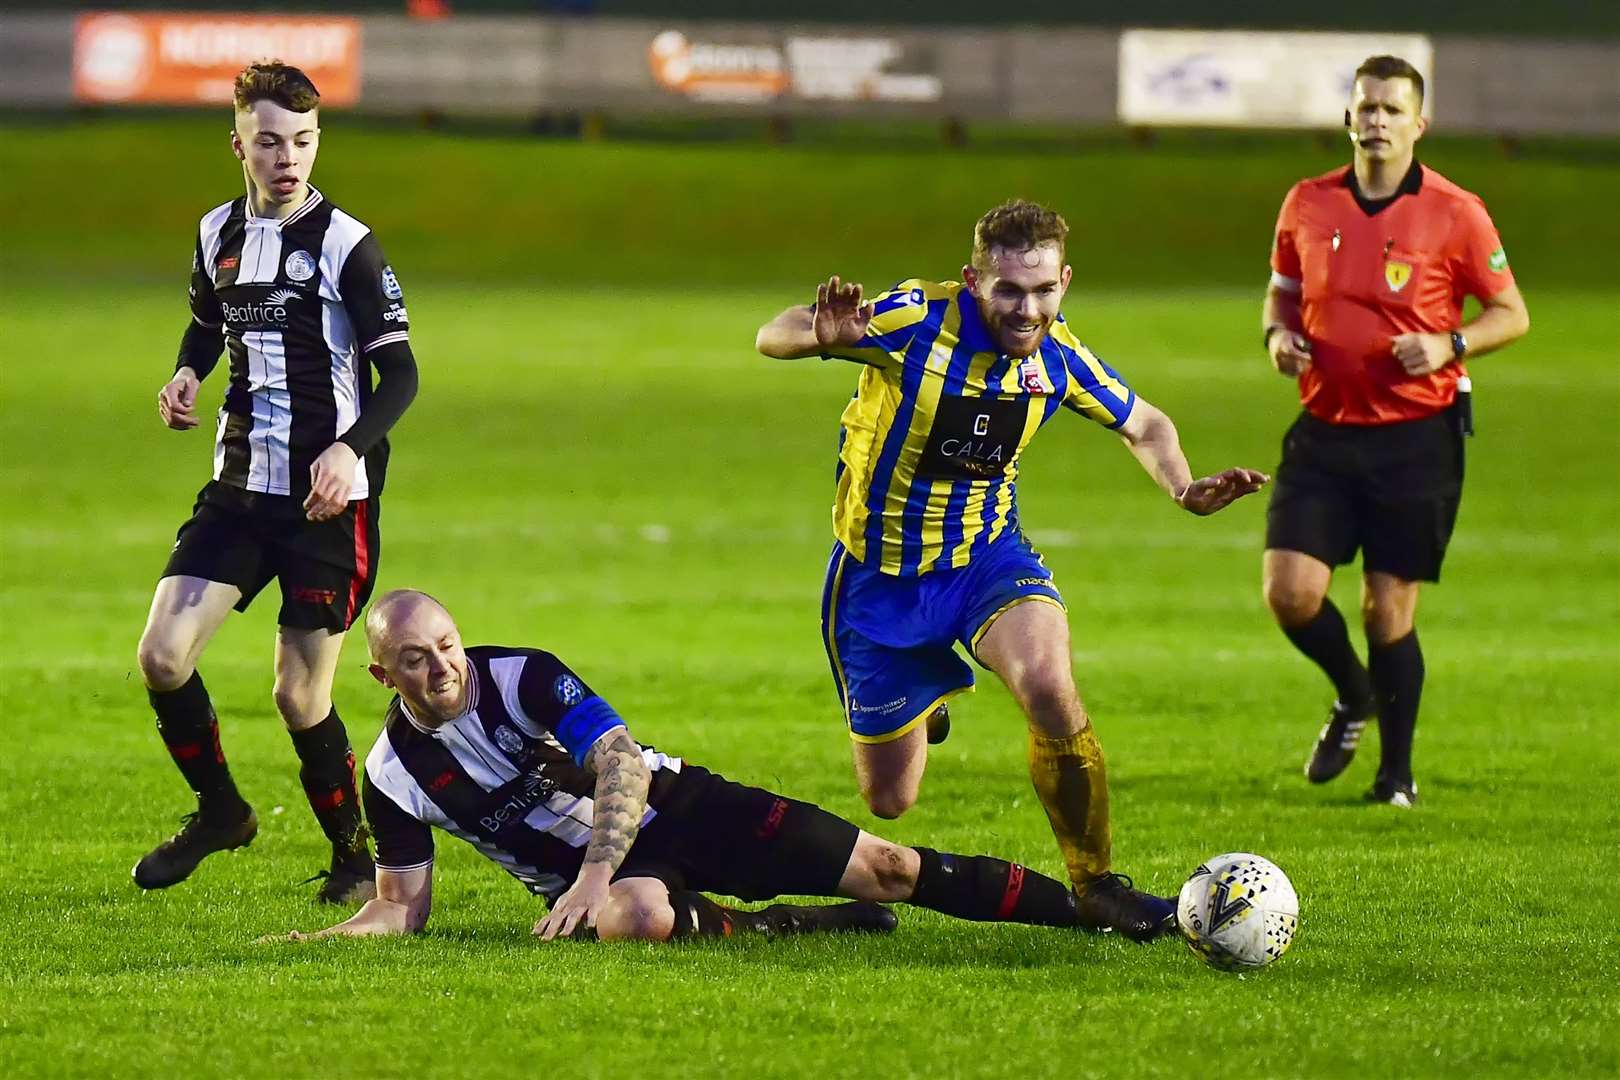 Inverurie's Craig Gill goes to ground after a challenge by Wick defender Danny Mackay. Picture: Mel Roger